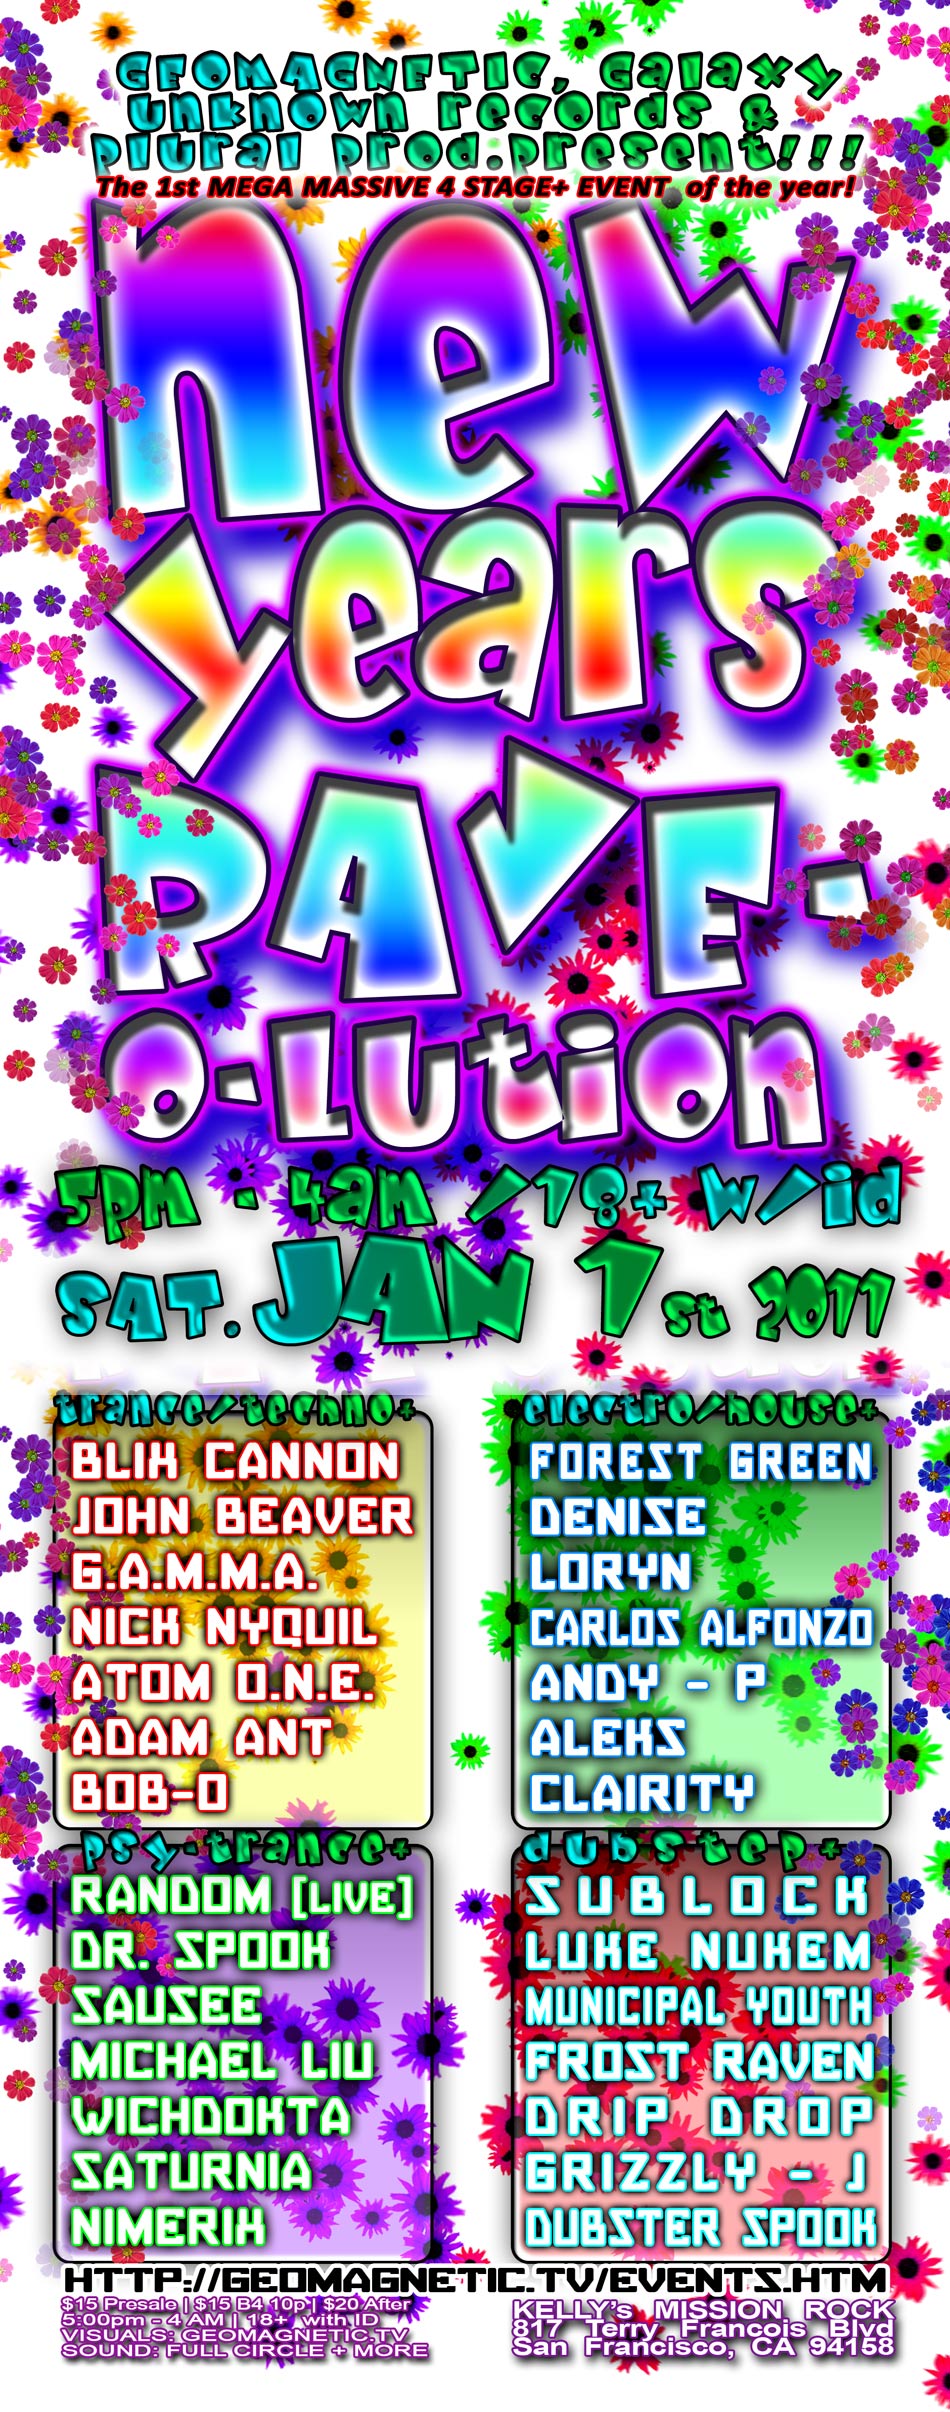  NEW YEARS RAVE-O-LUTION: 4 Stage Massive New Years Weekend Sat. Jan. 1st, 2011